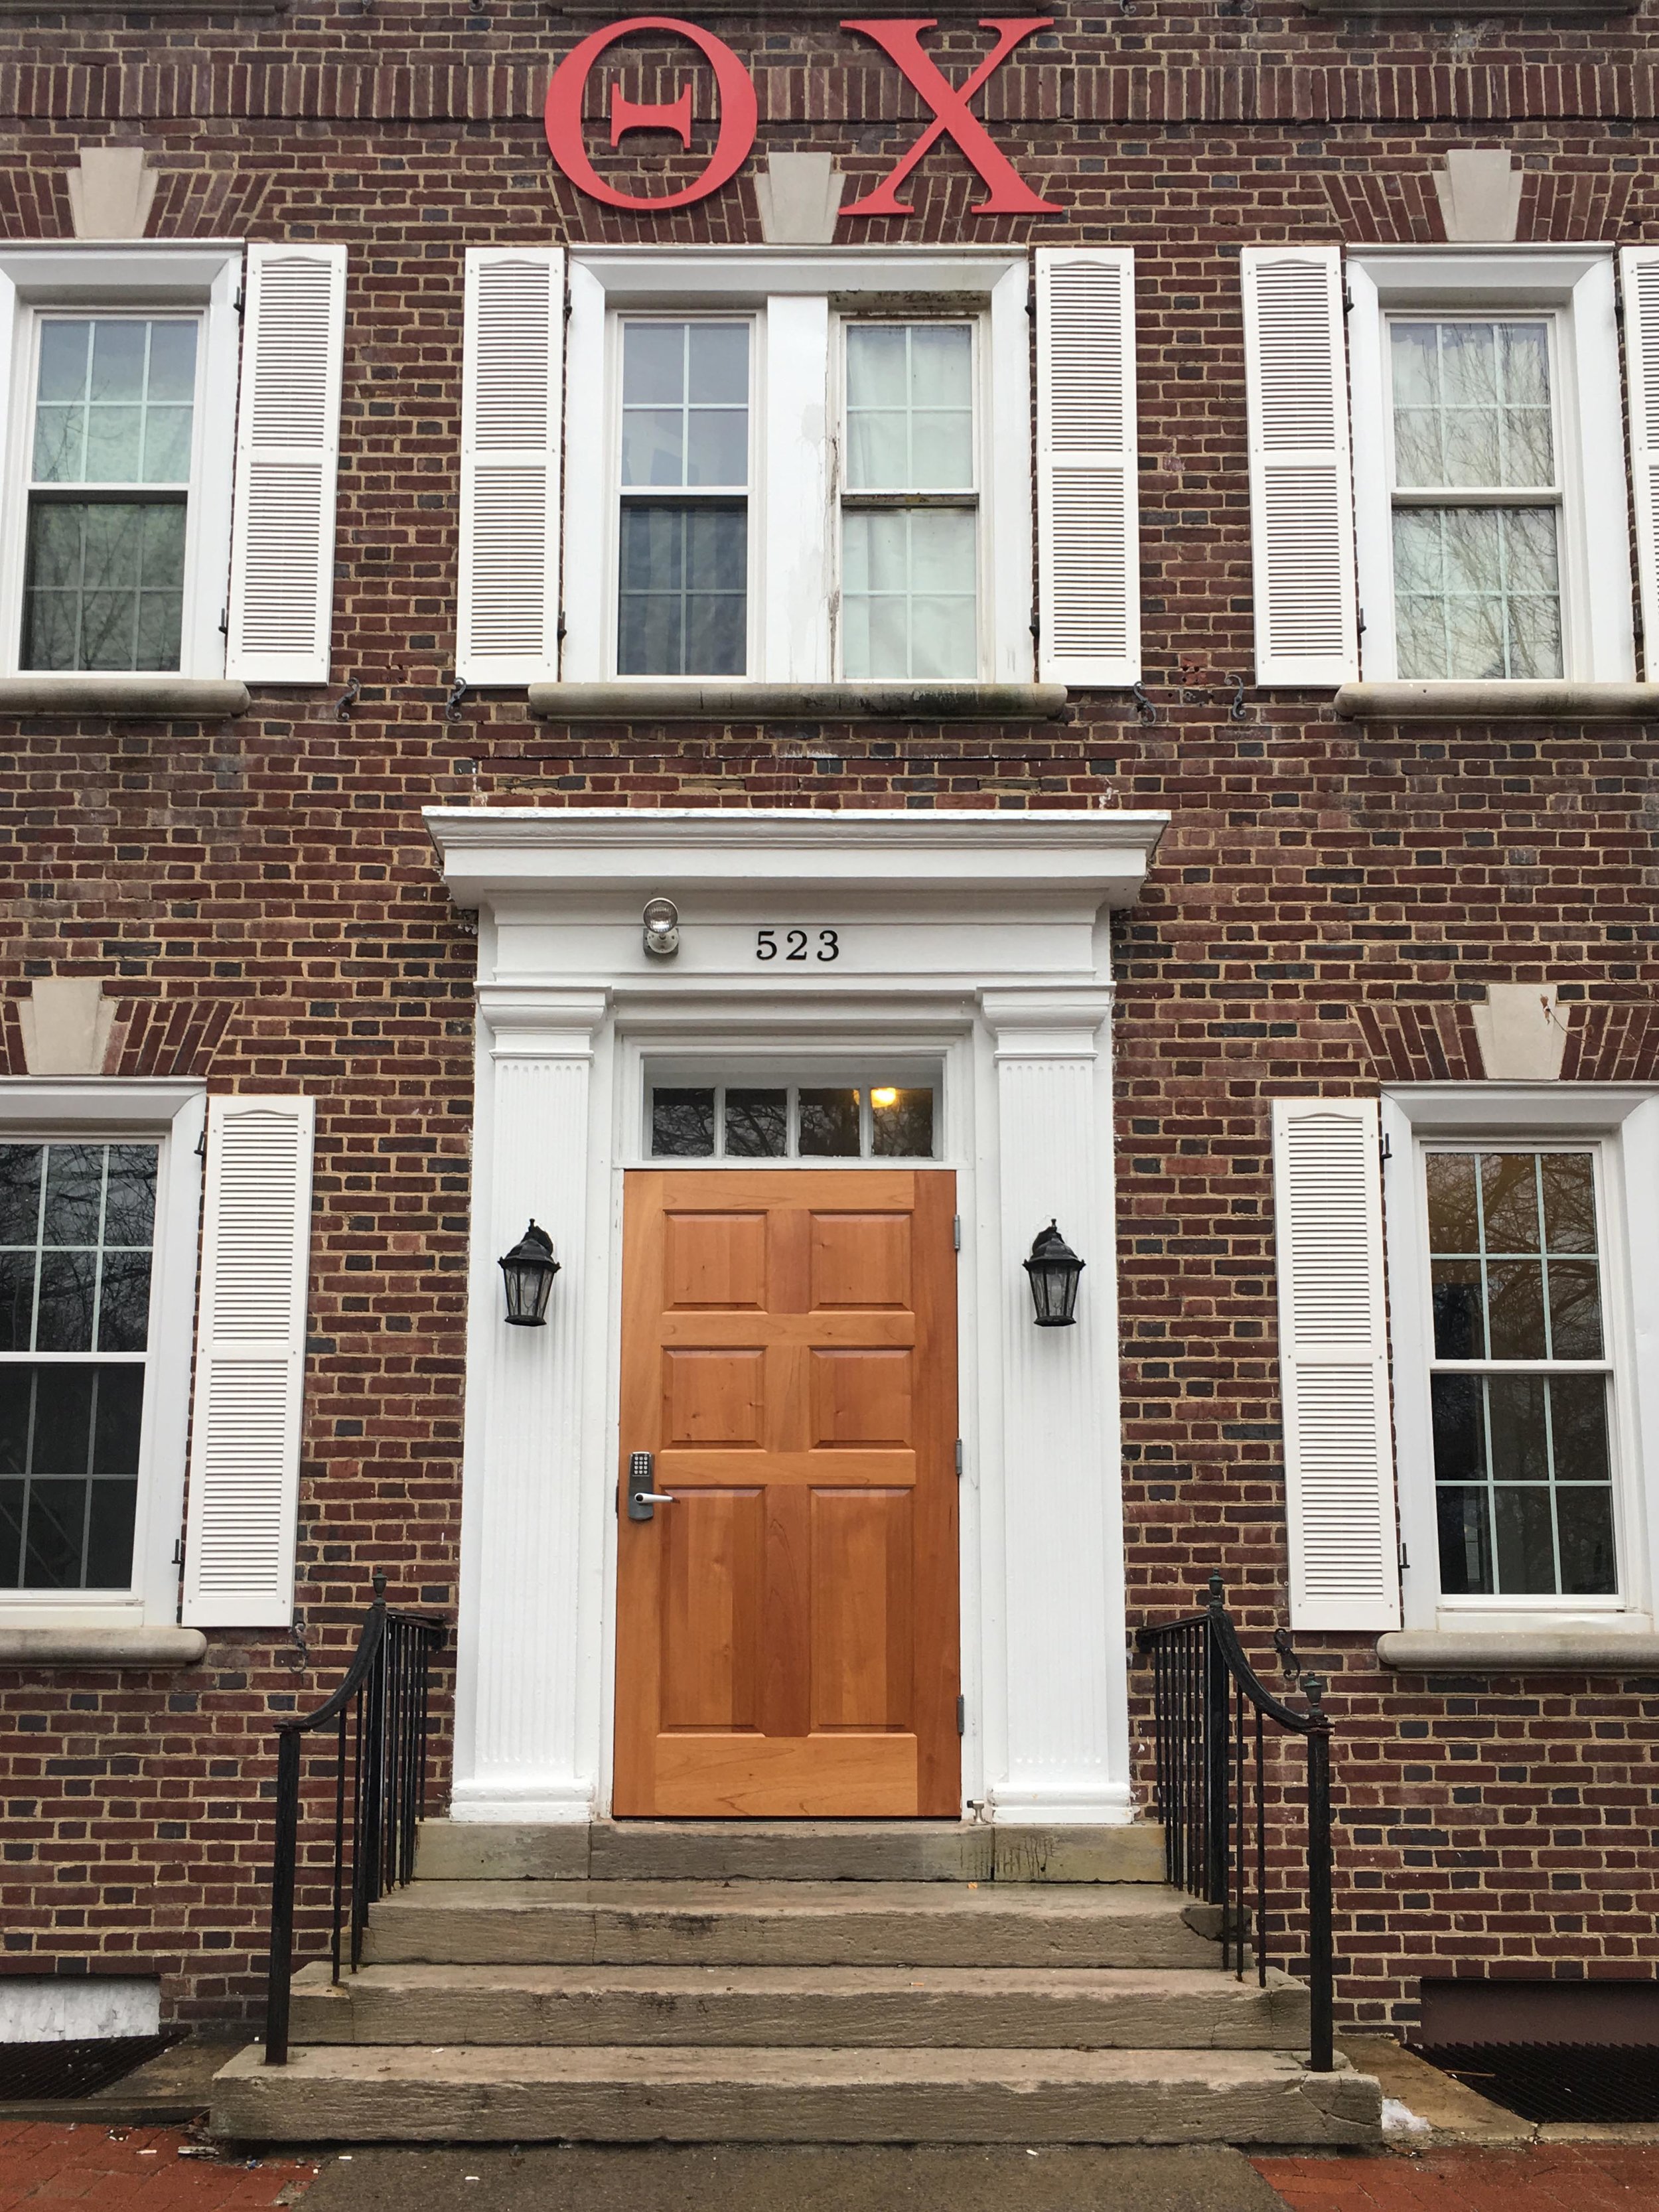  Spring 2017 - New Front Door to Chapter House 